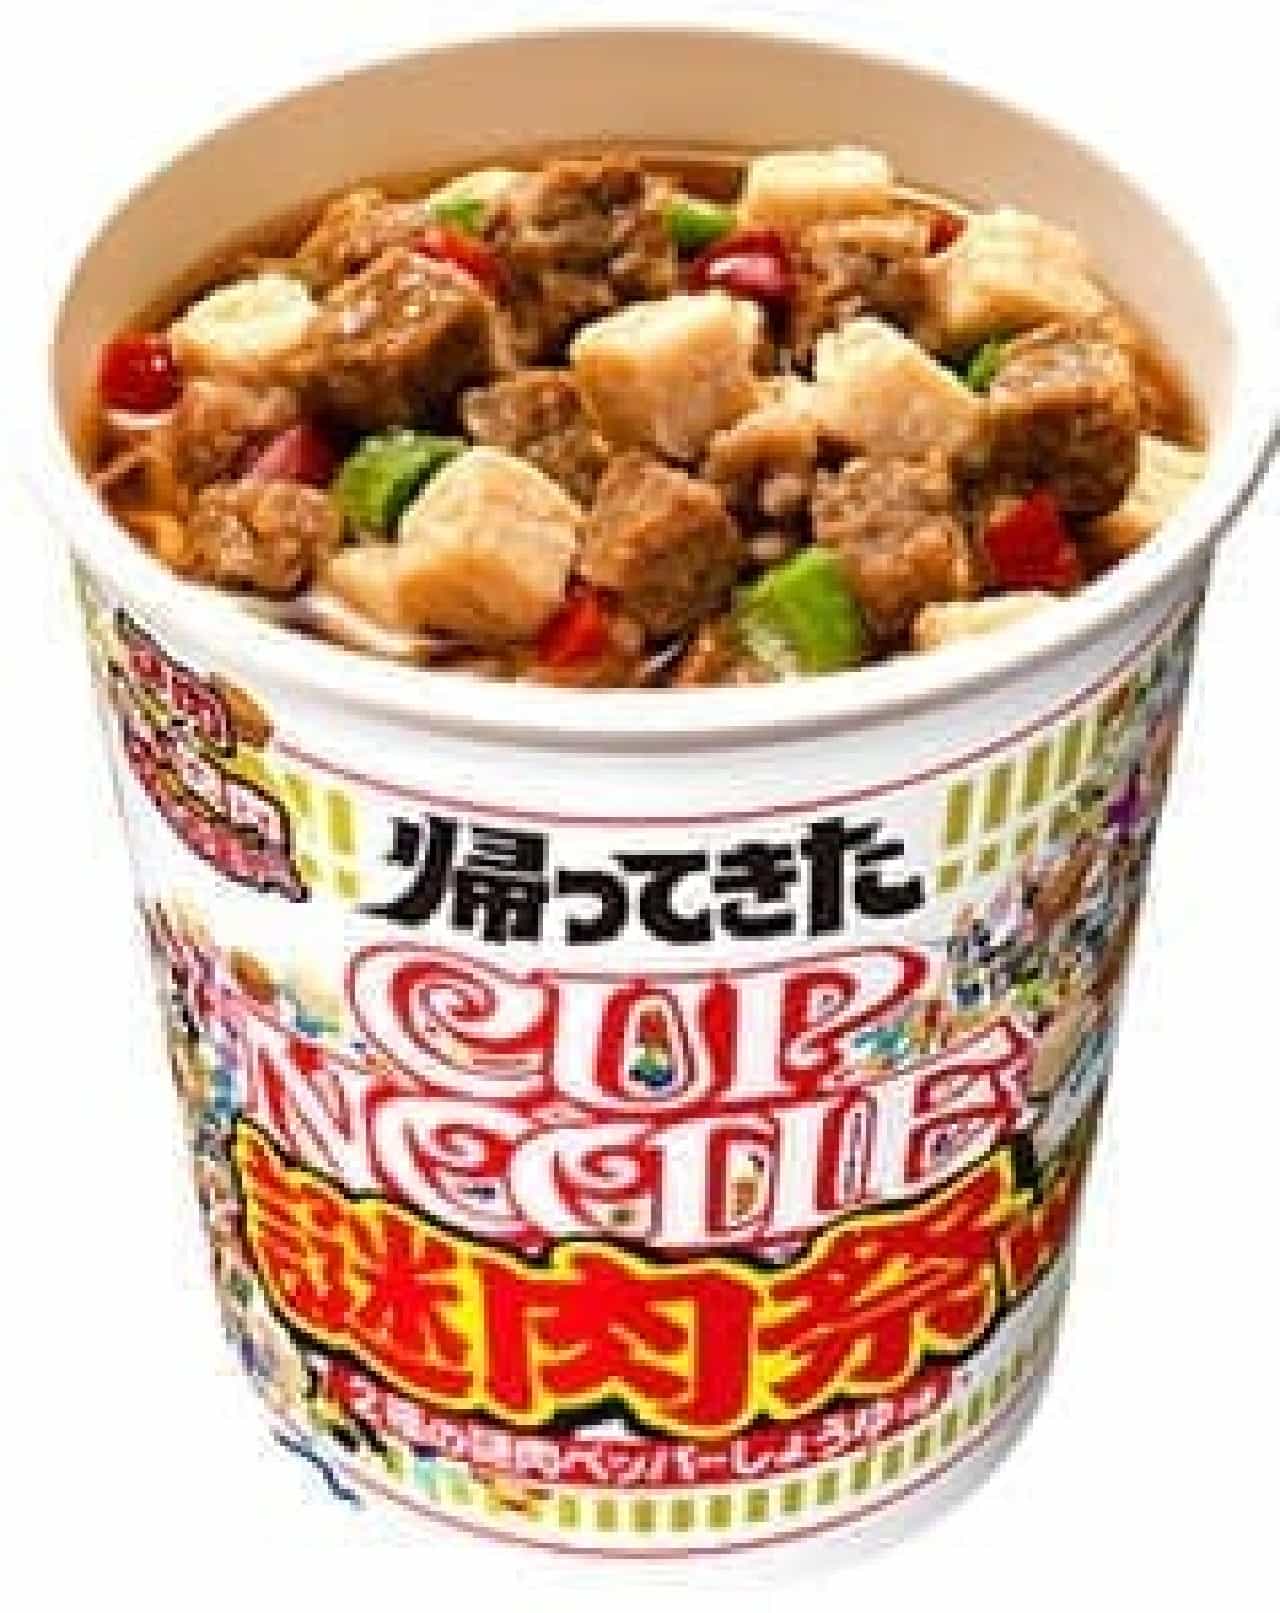 Nissin Foods "Cup Noodle Big Returned Mysterious Meat Festival W"